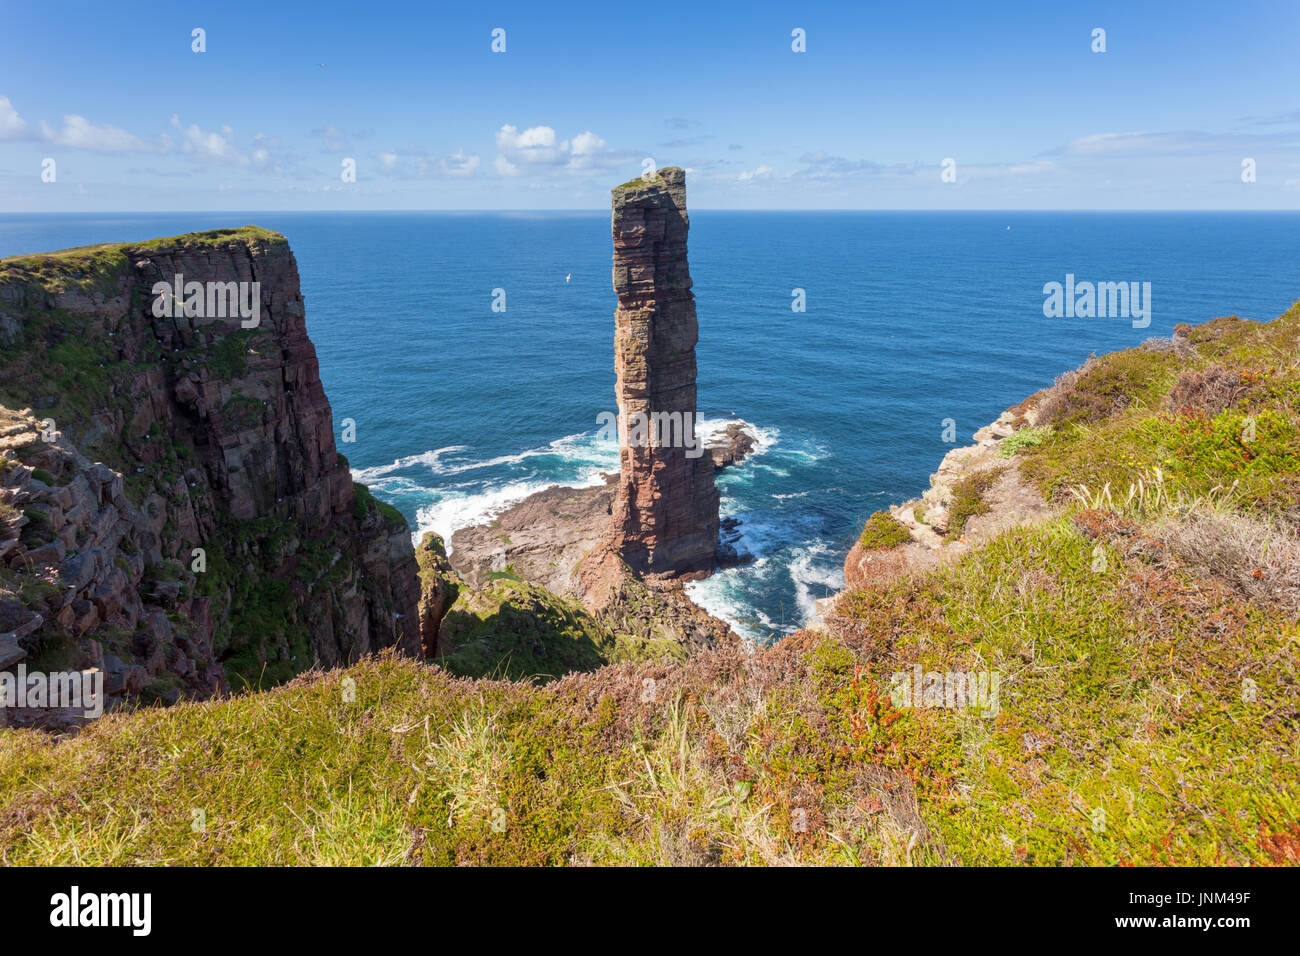 The Old Man of Hoy, a rock stack popular with climbers, Hoy, Orkney UK Stock Photo